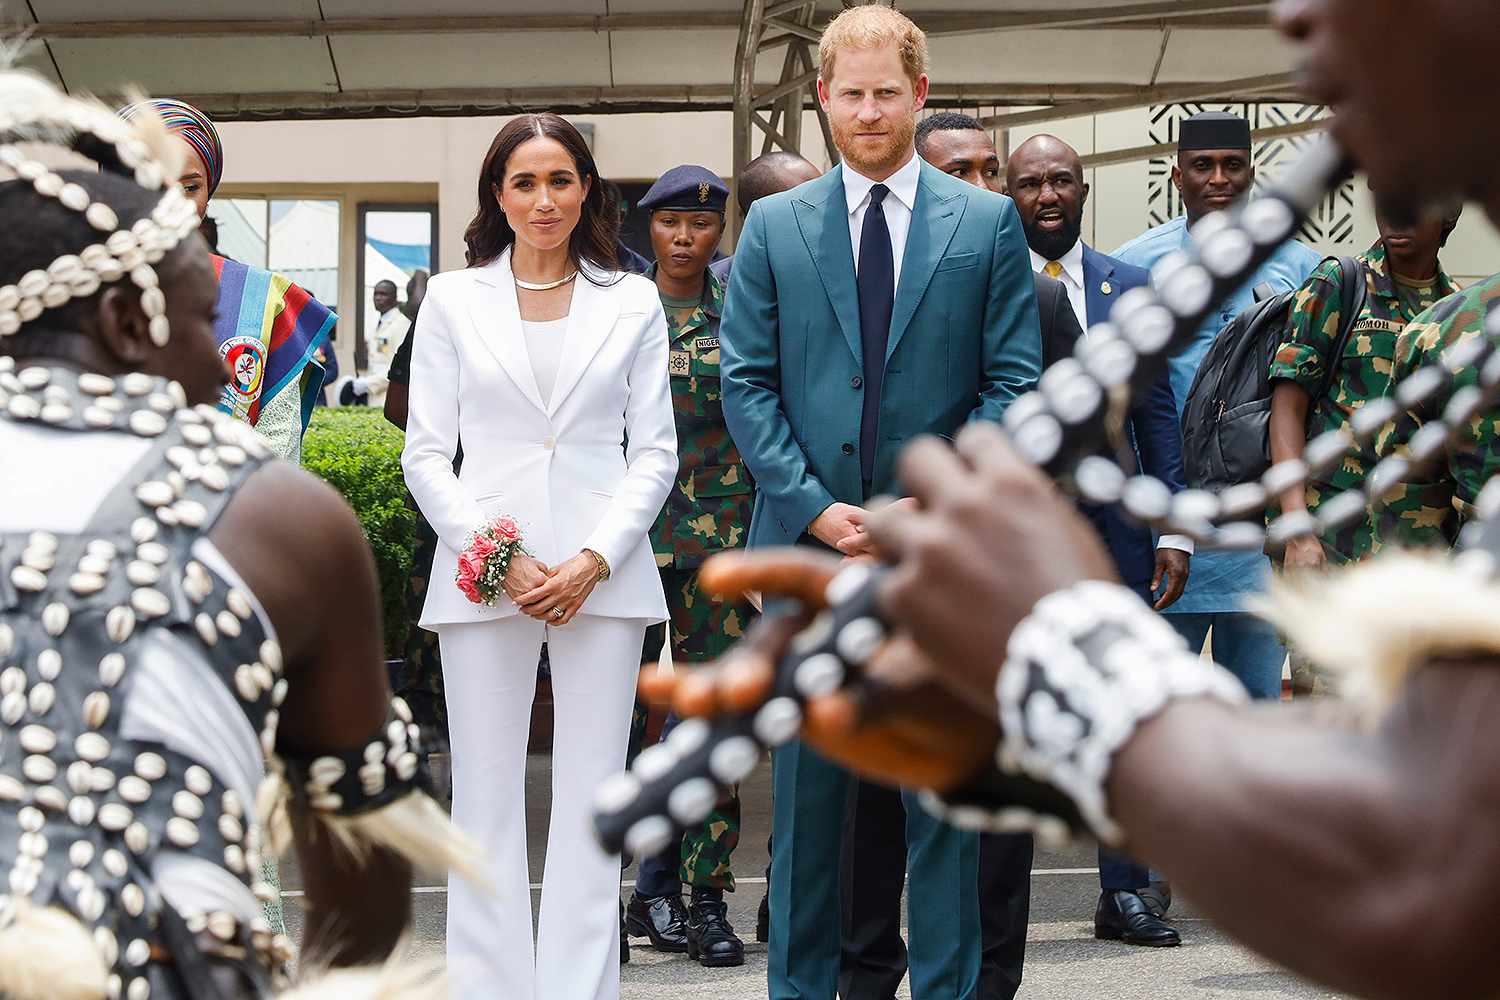 Prince Harry, Duke of Sussex and Meghan, Duchess of Sussex meet with the Chief of Defence Staff of Nigeria at the Defence Headquarters in Abuja